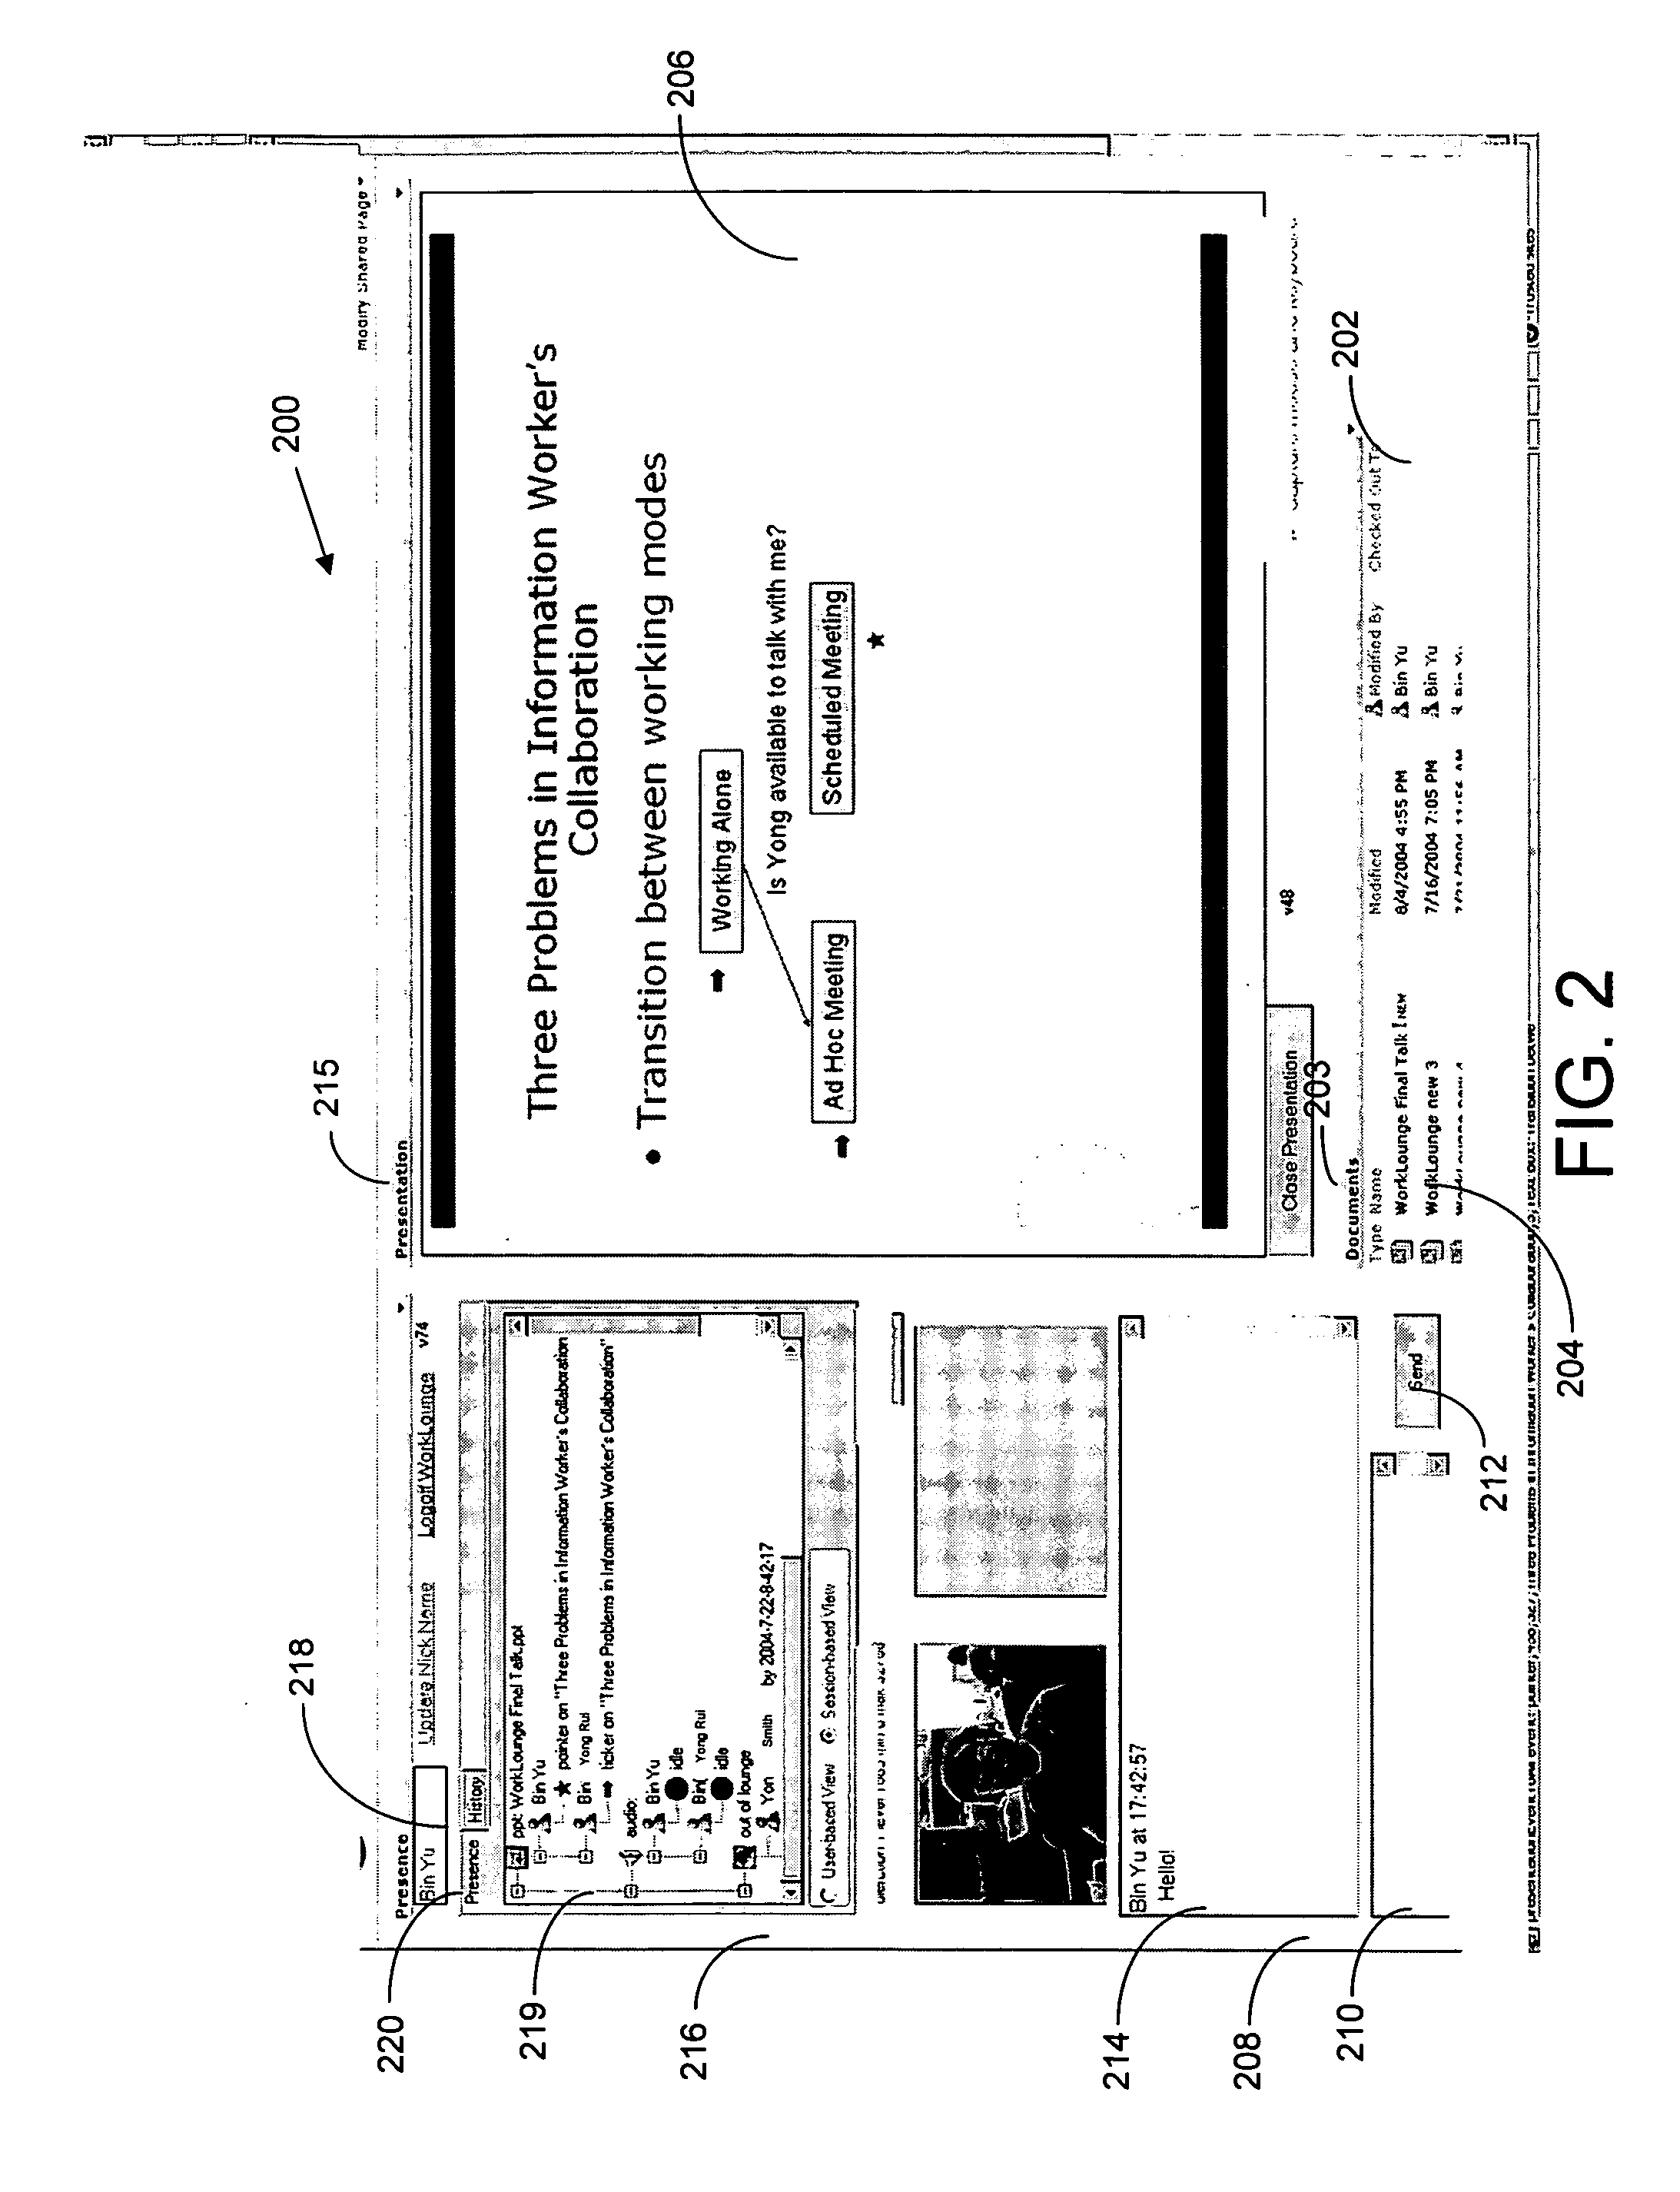 System and process for providing an interactive, computer network-based, virtual team worksite